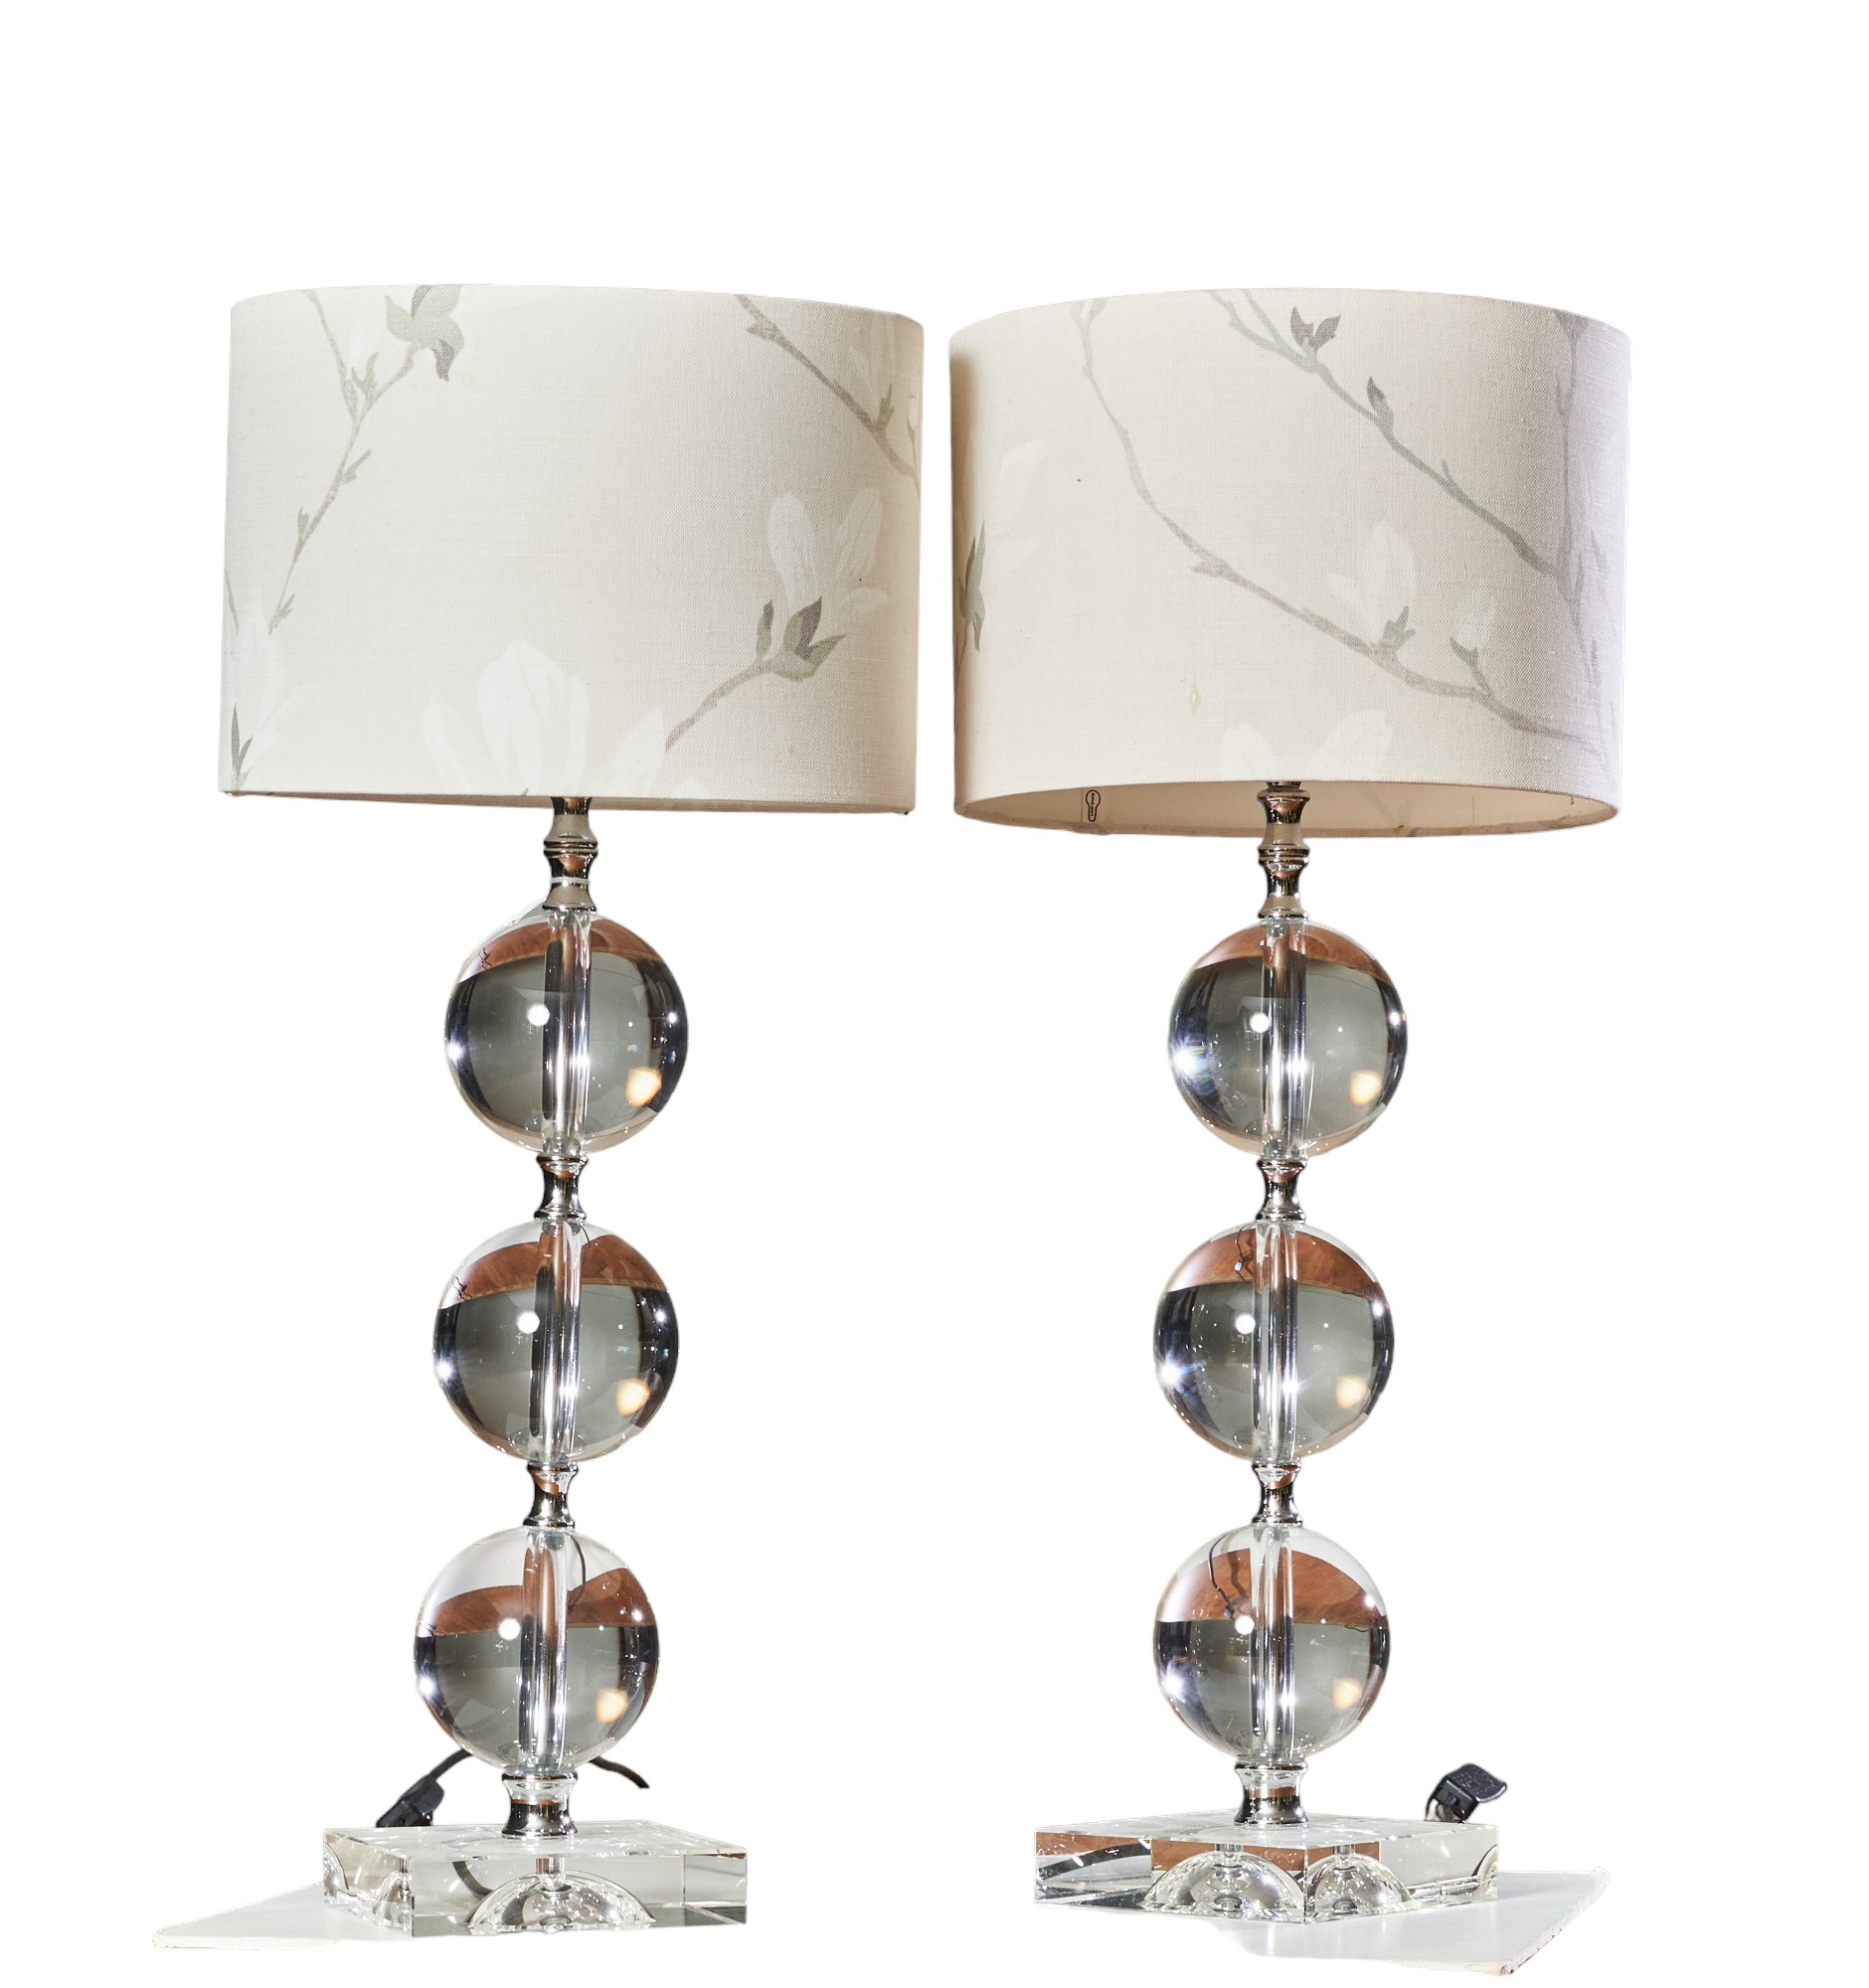 NO RESERVE: Contemporary, A pair of glass and polished chrome lamps